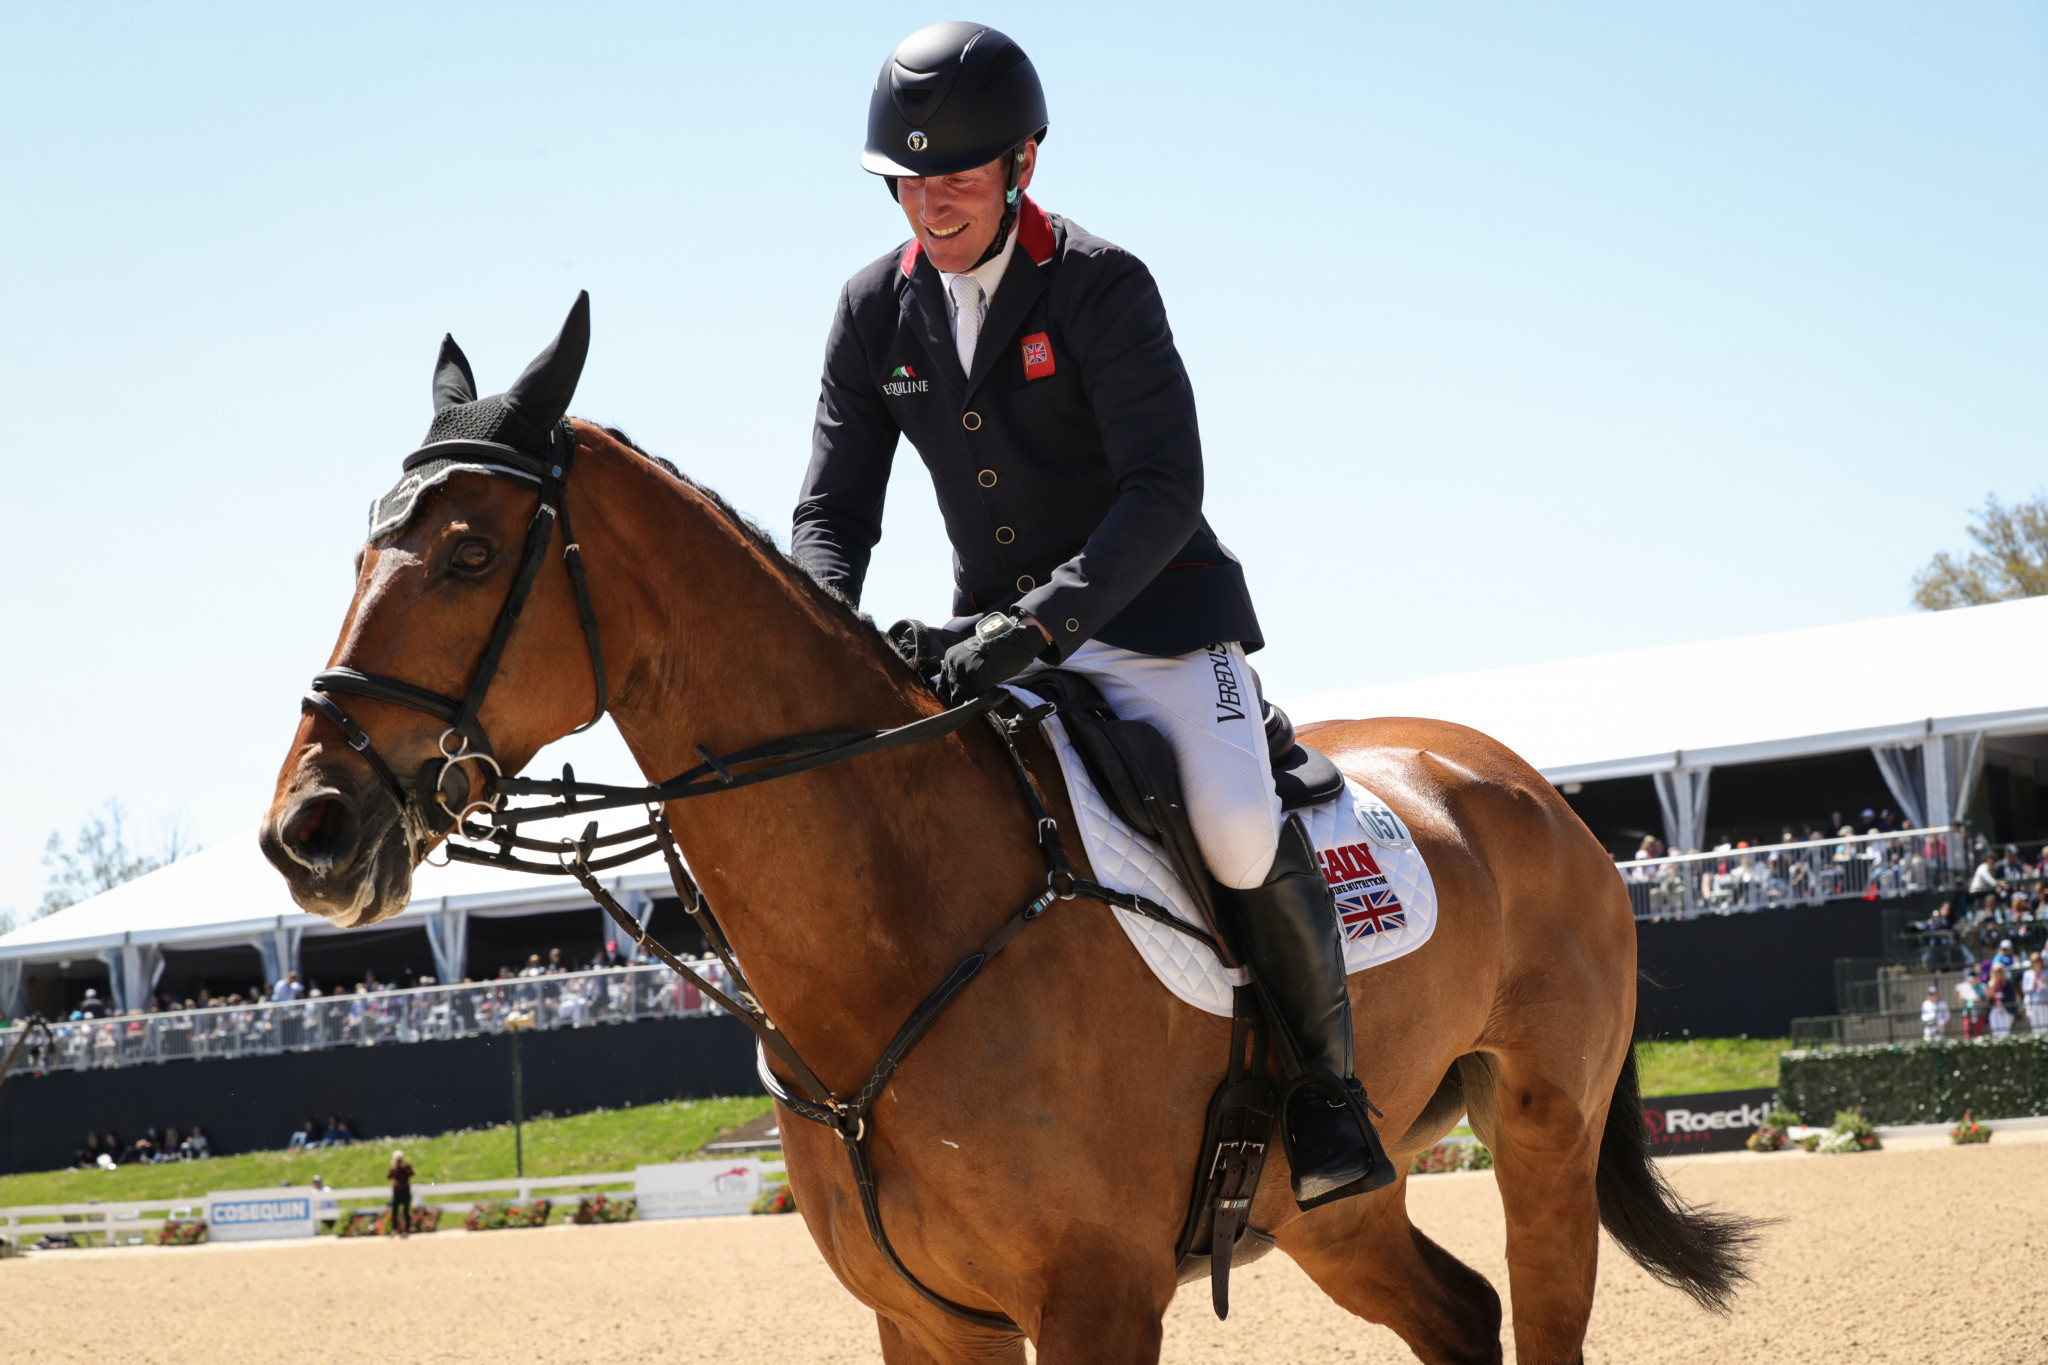 Britain's Oliver Townend is in first and second position after the dressage phase of the Badminton Horse Trials ©Getty Images